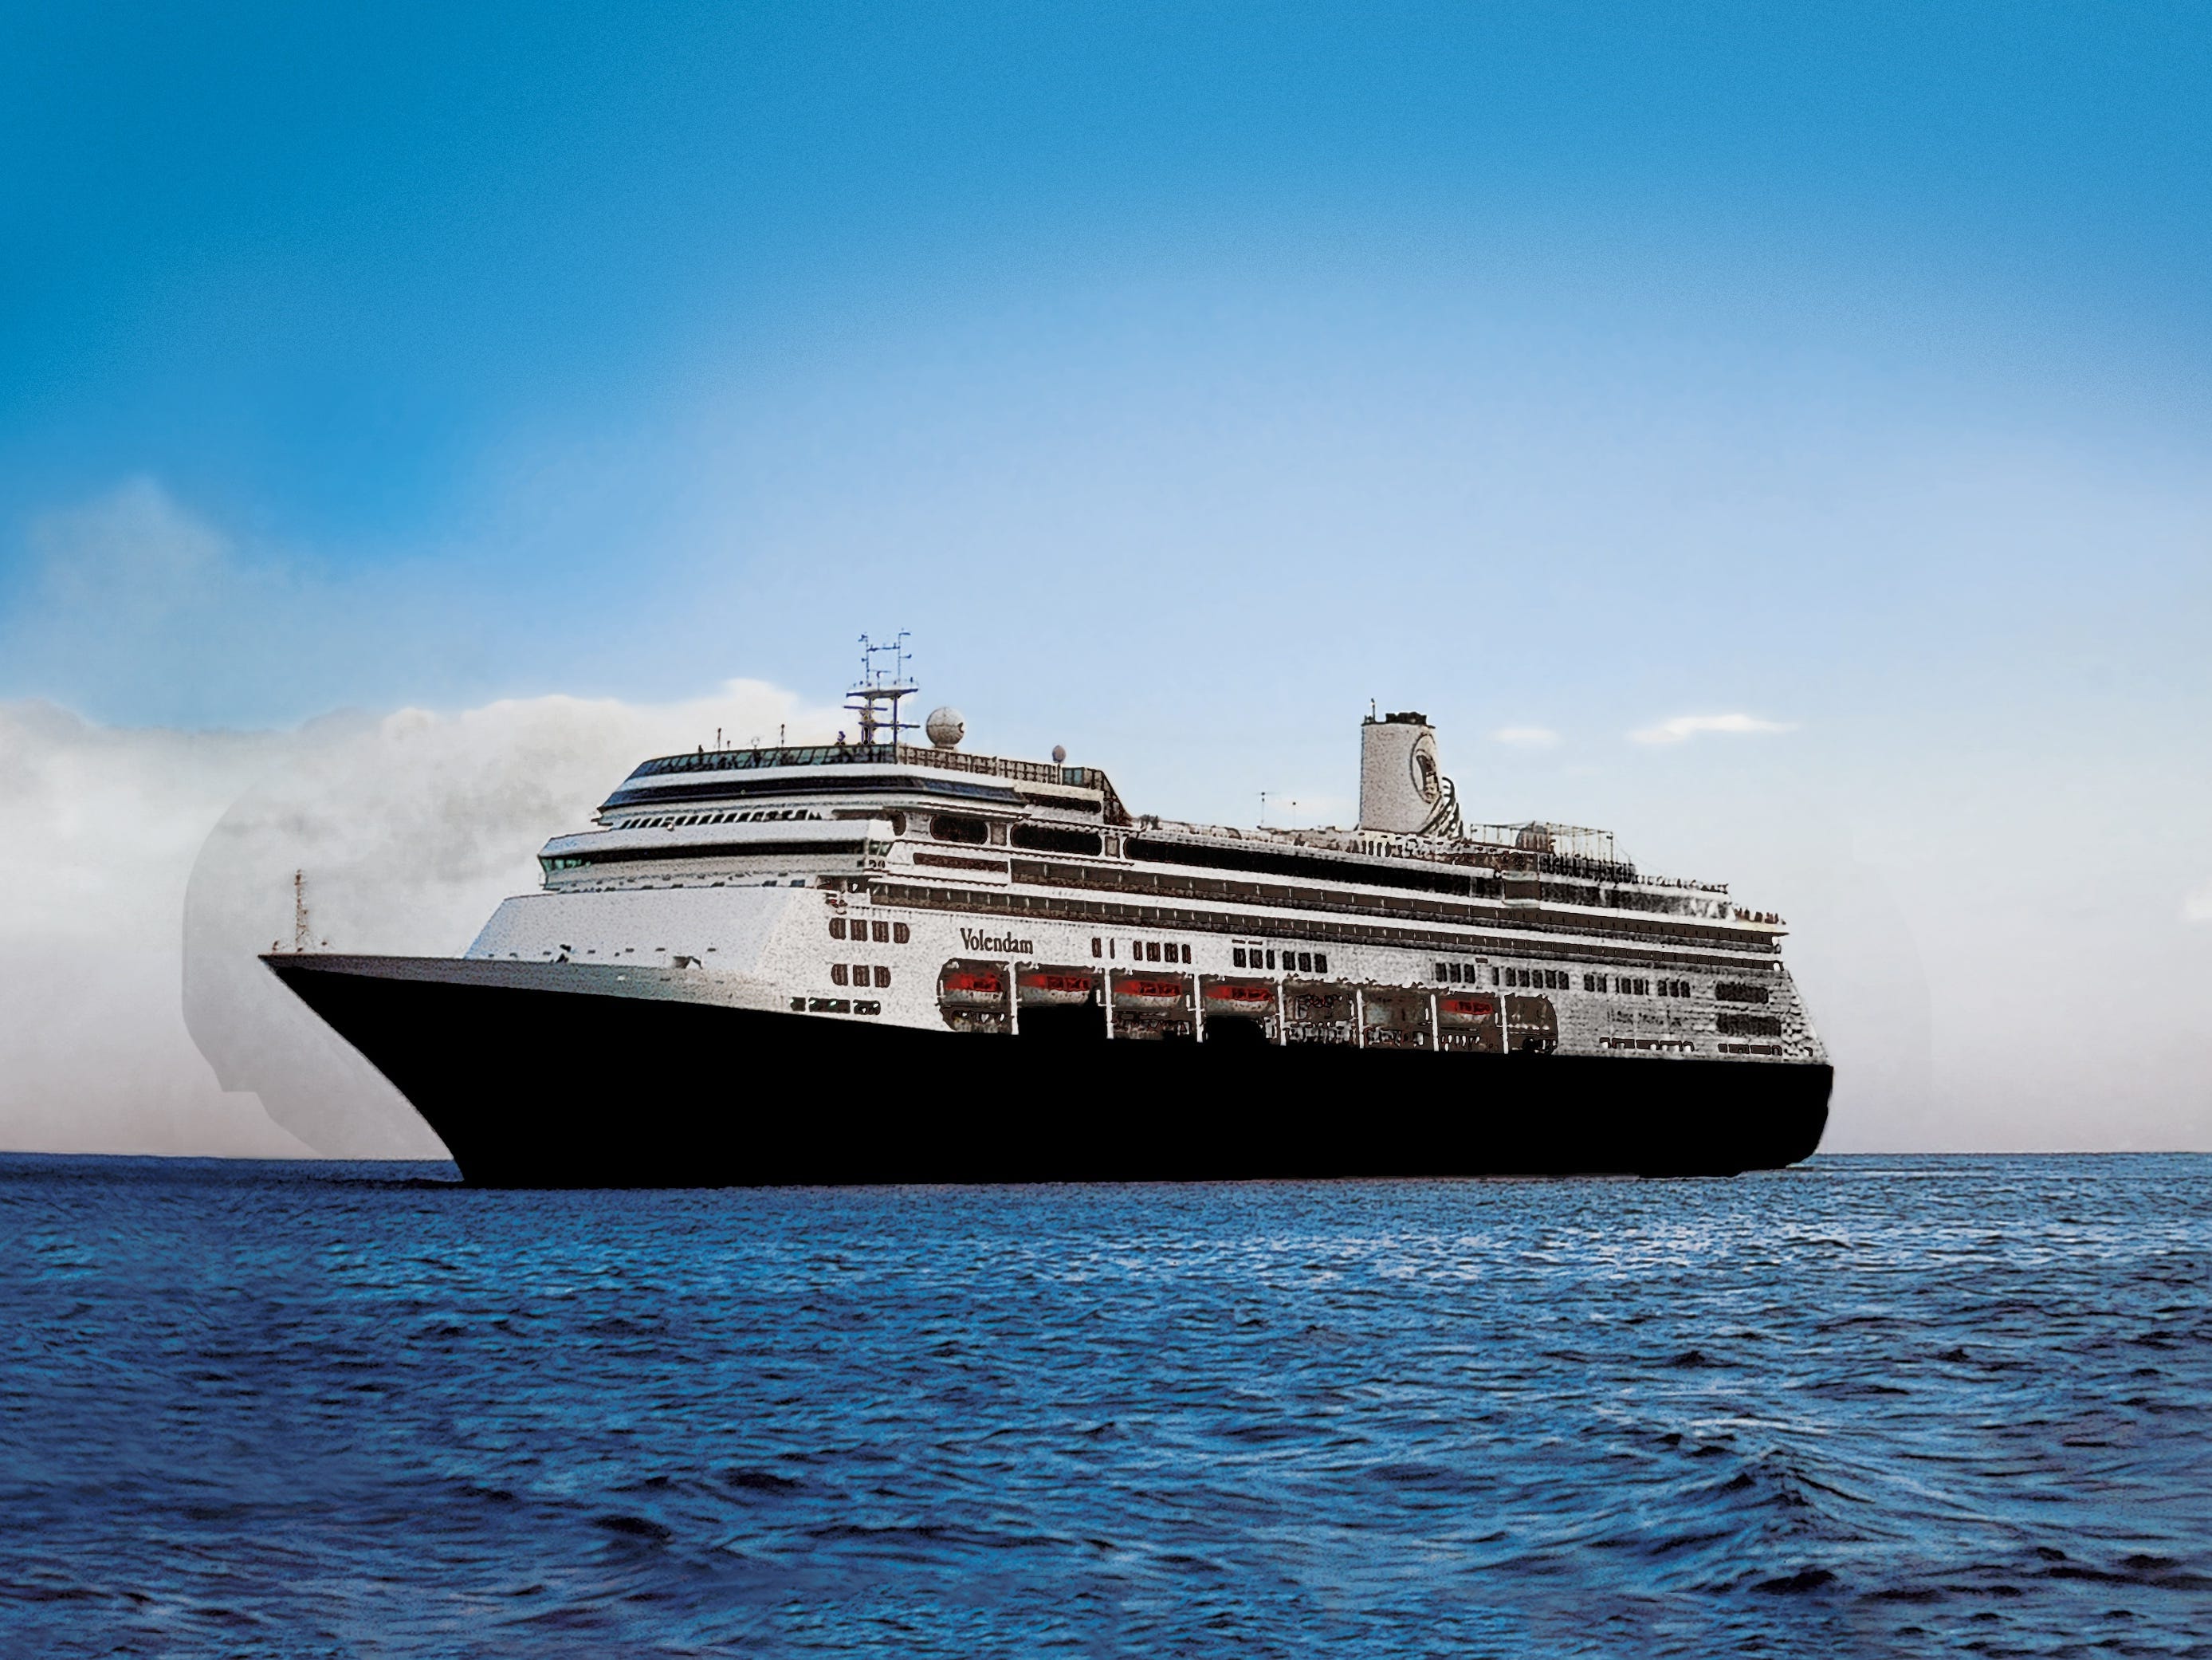 <p><strong>Cost:</strong> $$ | Prices range from $94/pp for a one-day Pacific Northwest cruise to a $27,399/pp for a 132-day Grand Voyage</p><p><strong>Ideal for: </strong>Music lovers and sophisticated world travelers who appreciate European hospitality and smaller ships</p><p><strong>Skip if:</strong> You're young, traveling with children, or want to party</p><p><strong>Highlight: </strong>All Holland America Line cruises come with a dose of Dutch hospitality and elegance. During my cruise with the line, I enjoyed the Dutch cuisine and <a href="https://www.hollandamerica.com/en/us/onboard-experiences/entertainment">Music Walk</a>, which features live performances at B.B. King's Blues Club, Rolling Stone Rock Room, and Billboard Onboard.</p><p><strong>Possible cons: </strong>The line takes its formal nights really seriously and attracts an older crowd.</p><p>Holland America Line has had ships sailing the globe for over 140 years. Its 11 ships cruise to more than 425 ports of call on seven continents, and cruises range from one to 118 days.</p>